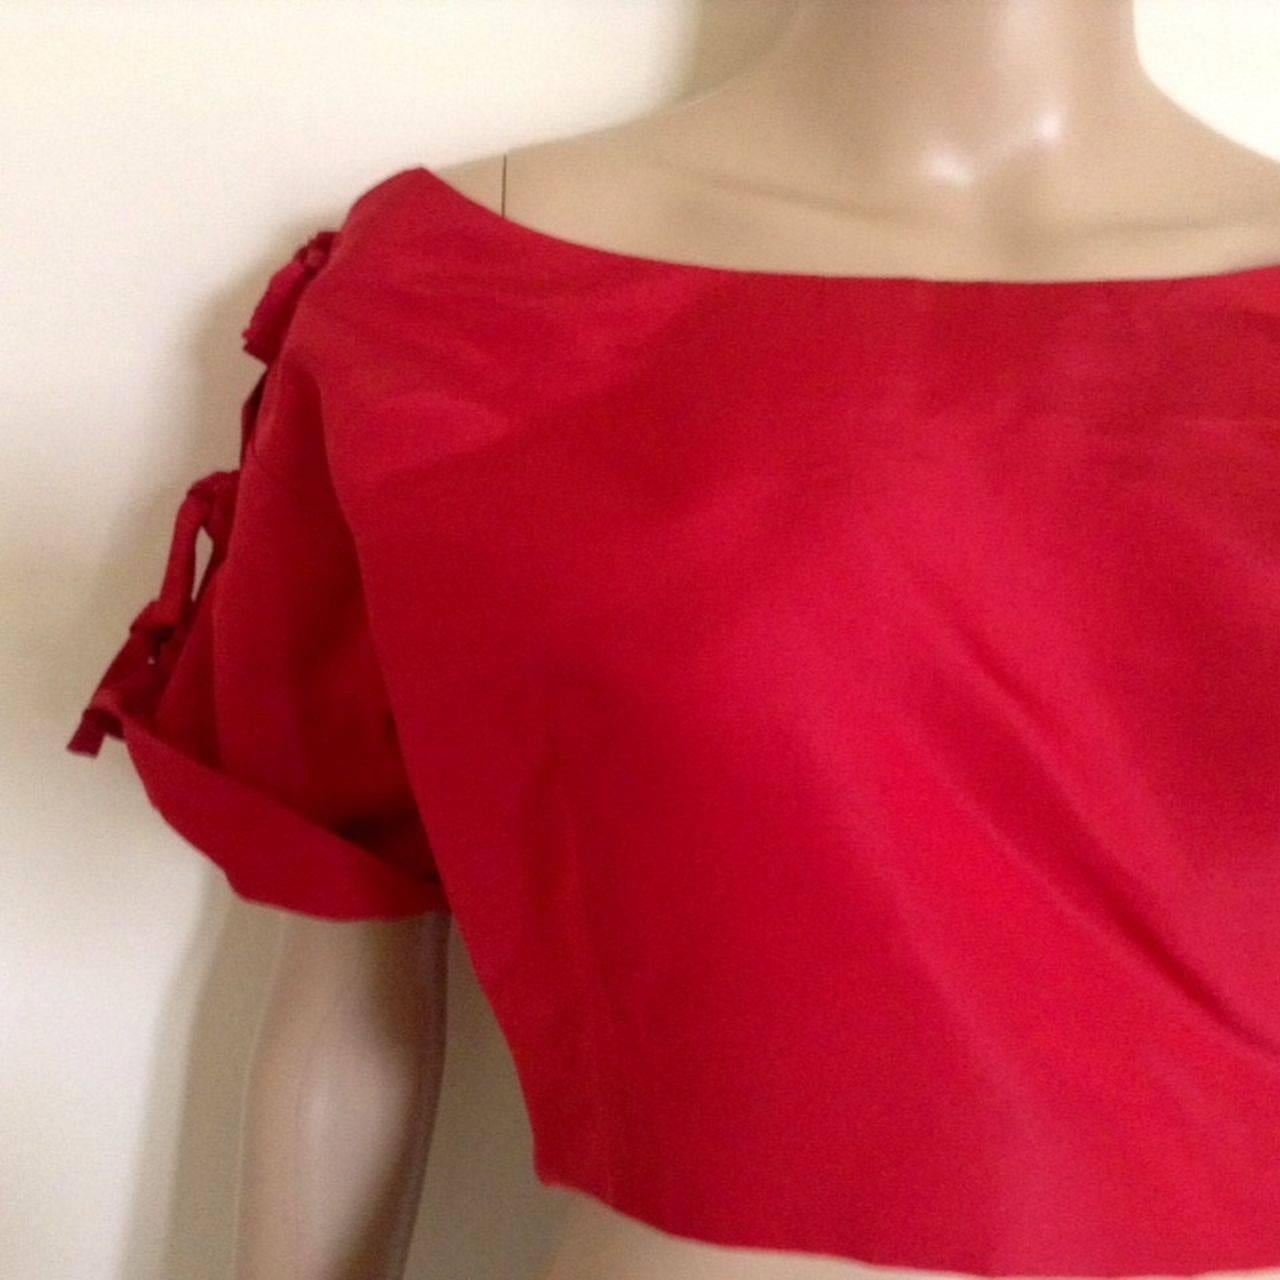 1953 Christian Dior Red Silk Bolero Jacket with Bow Details For Sale 1